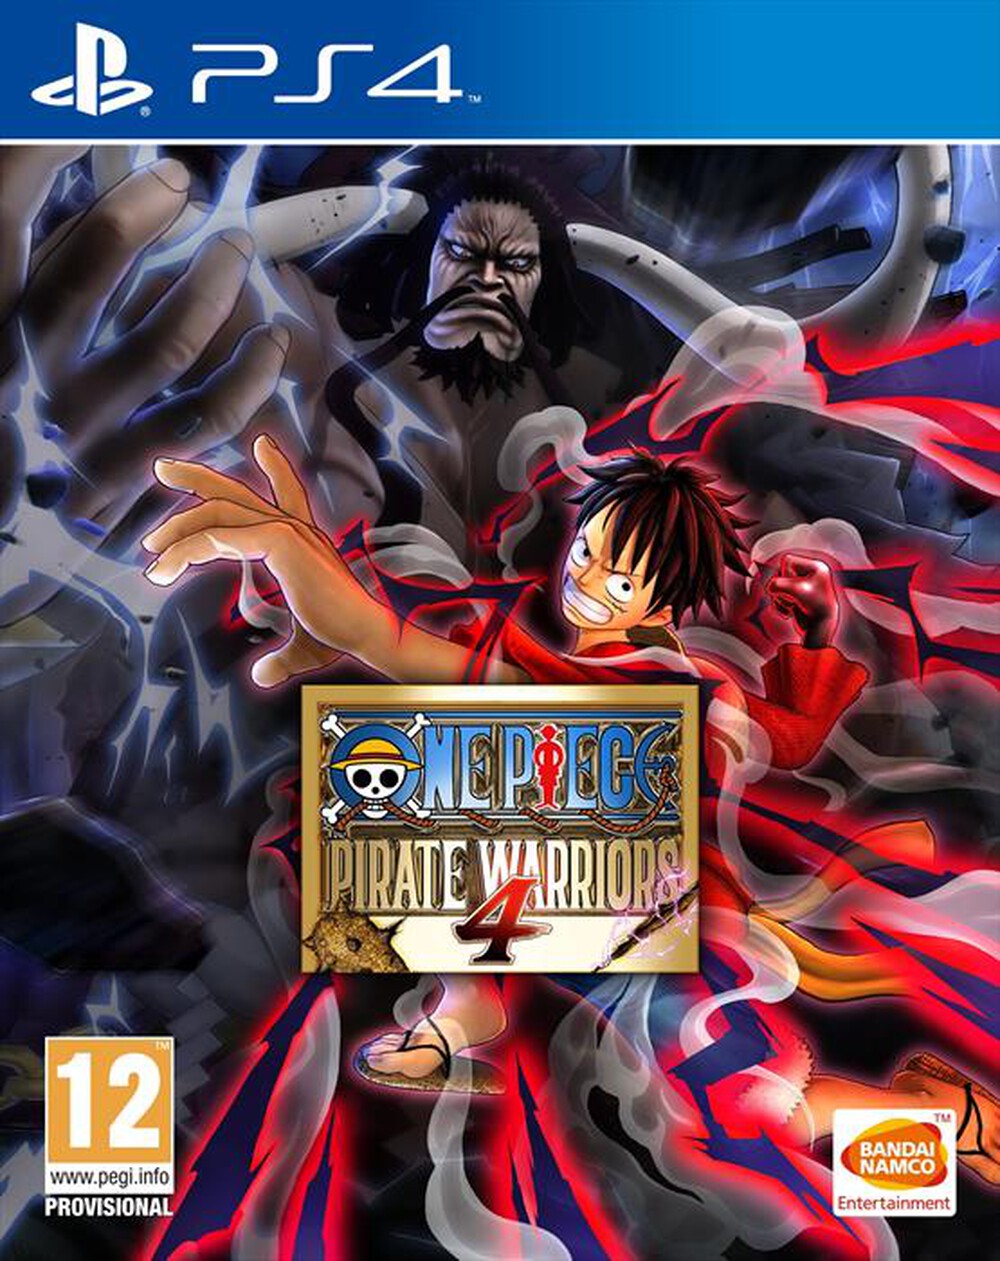 "NAMCO - ONE PIECE: PIRATE WARRIORS 4 PS4"